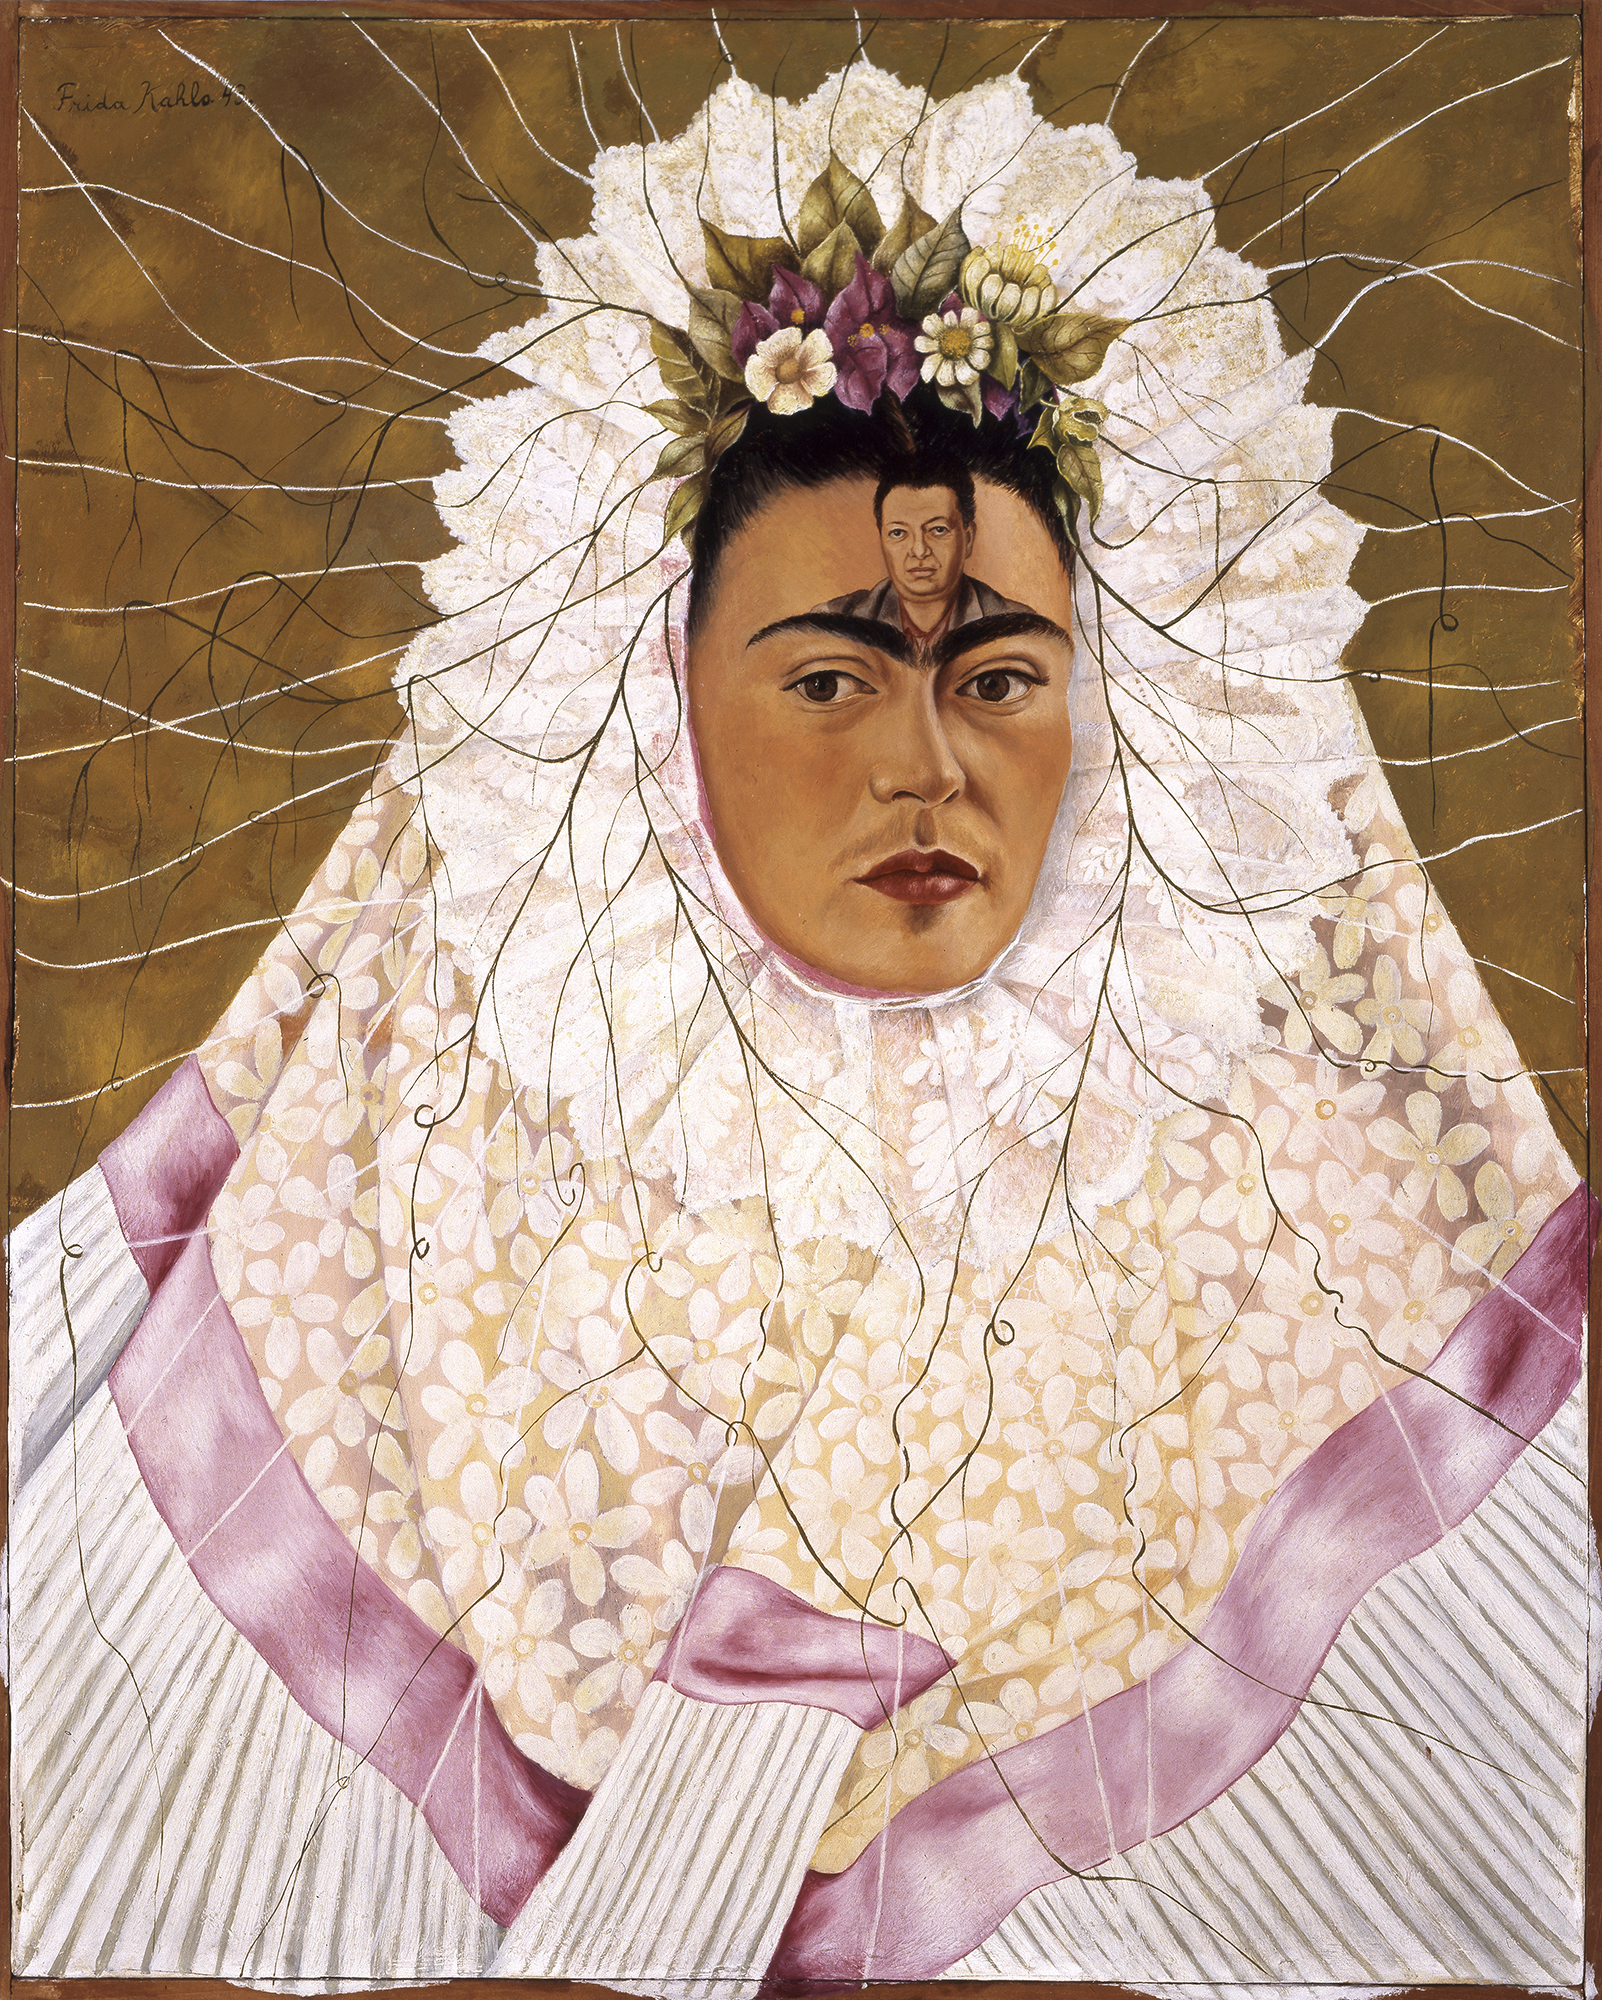 New Frida Kahlo Exhibit Paints a Fuller Picture of Her Life | Time